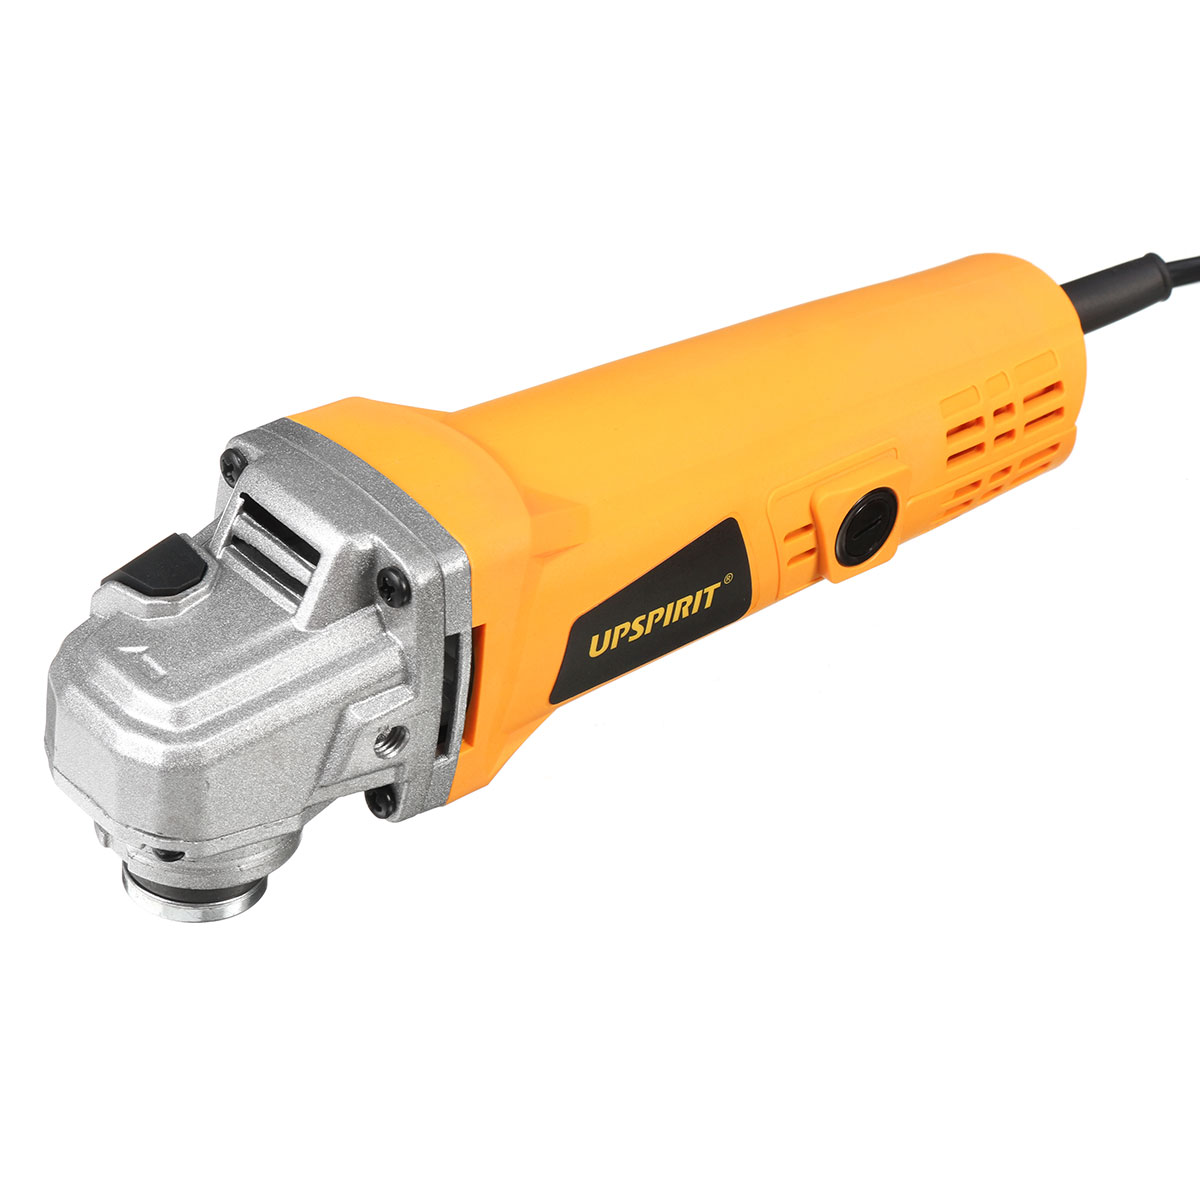 700W-Electric-Angle-Grinder-100mm-Polishing-Polisher-Grinding-Cutting-Tool-10000RPM-1560434-7